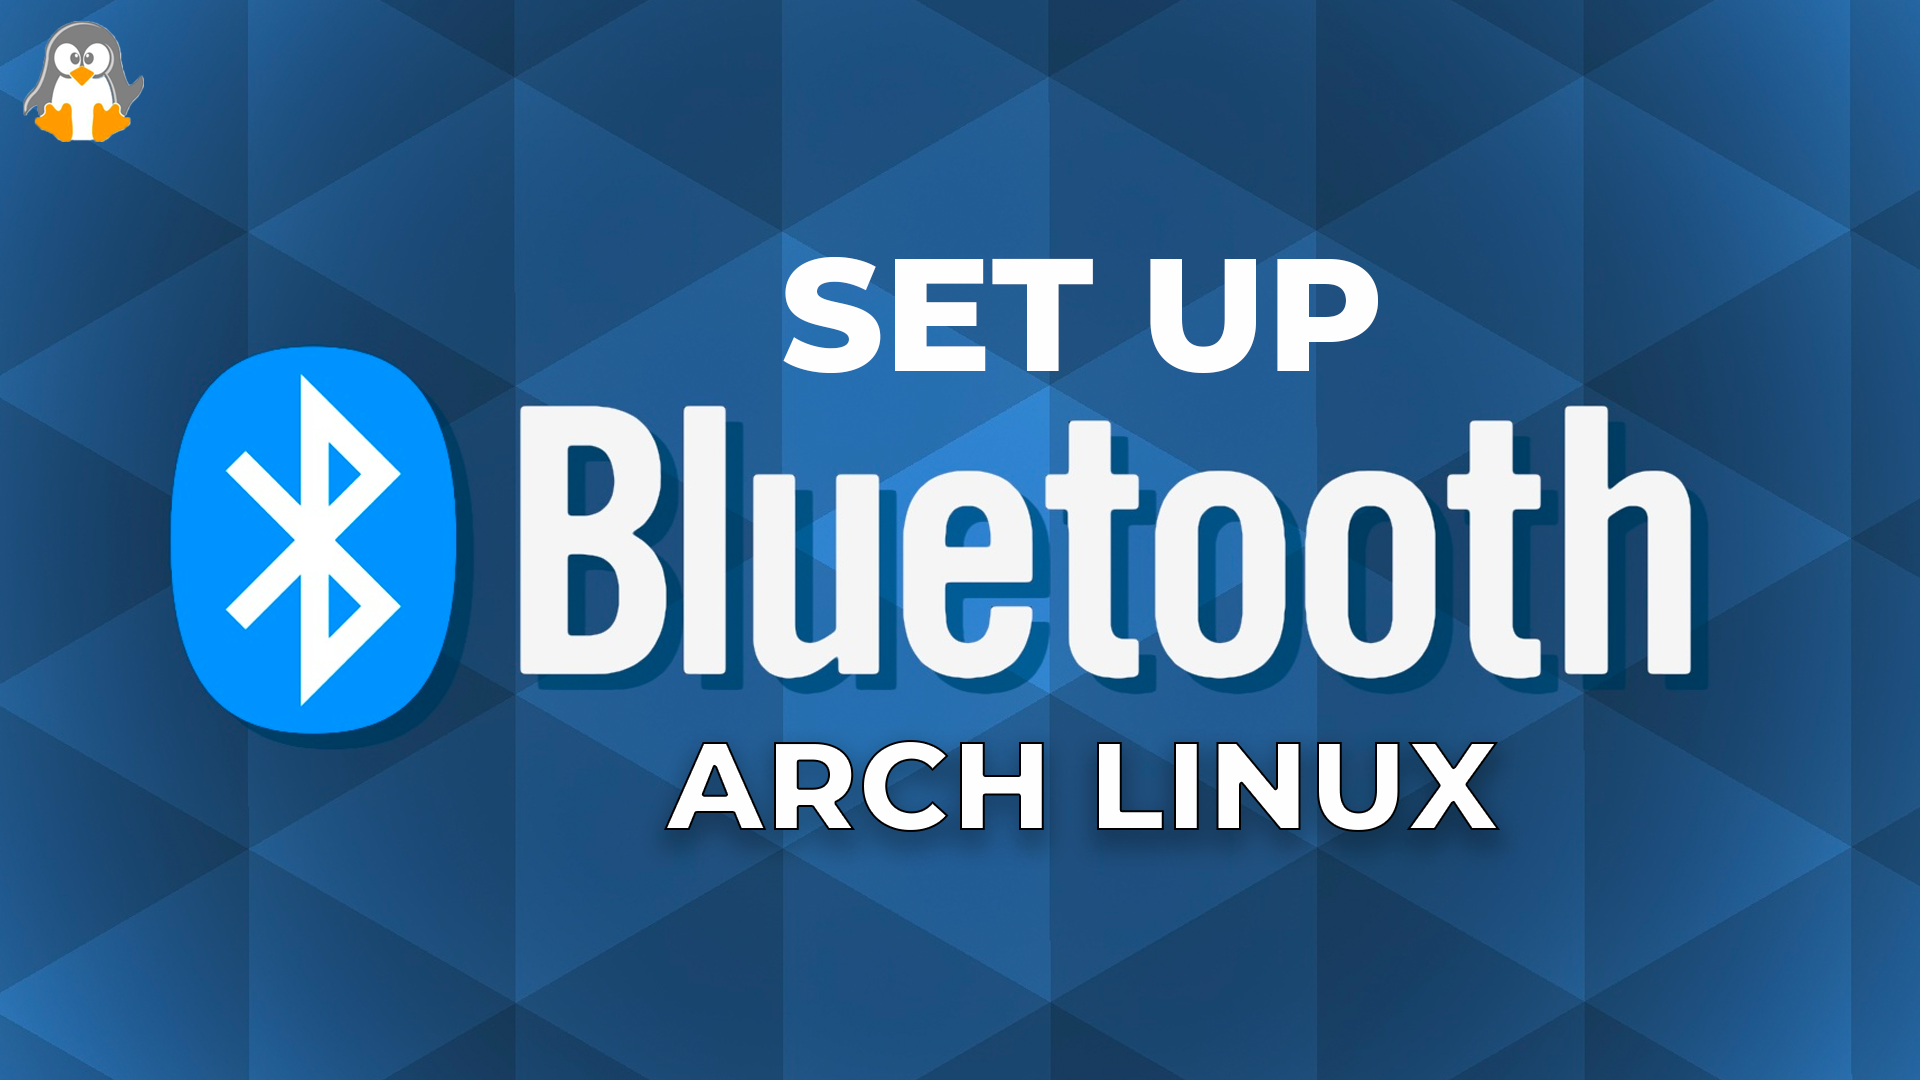 How to Set up Bluetooth on Arch Linux?